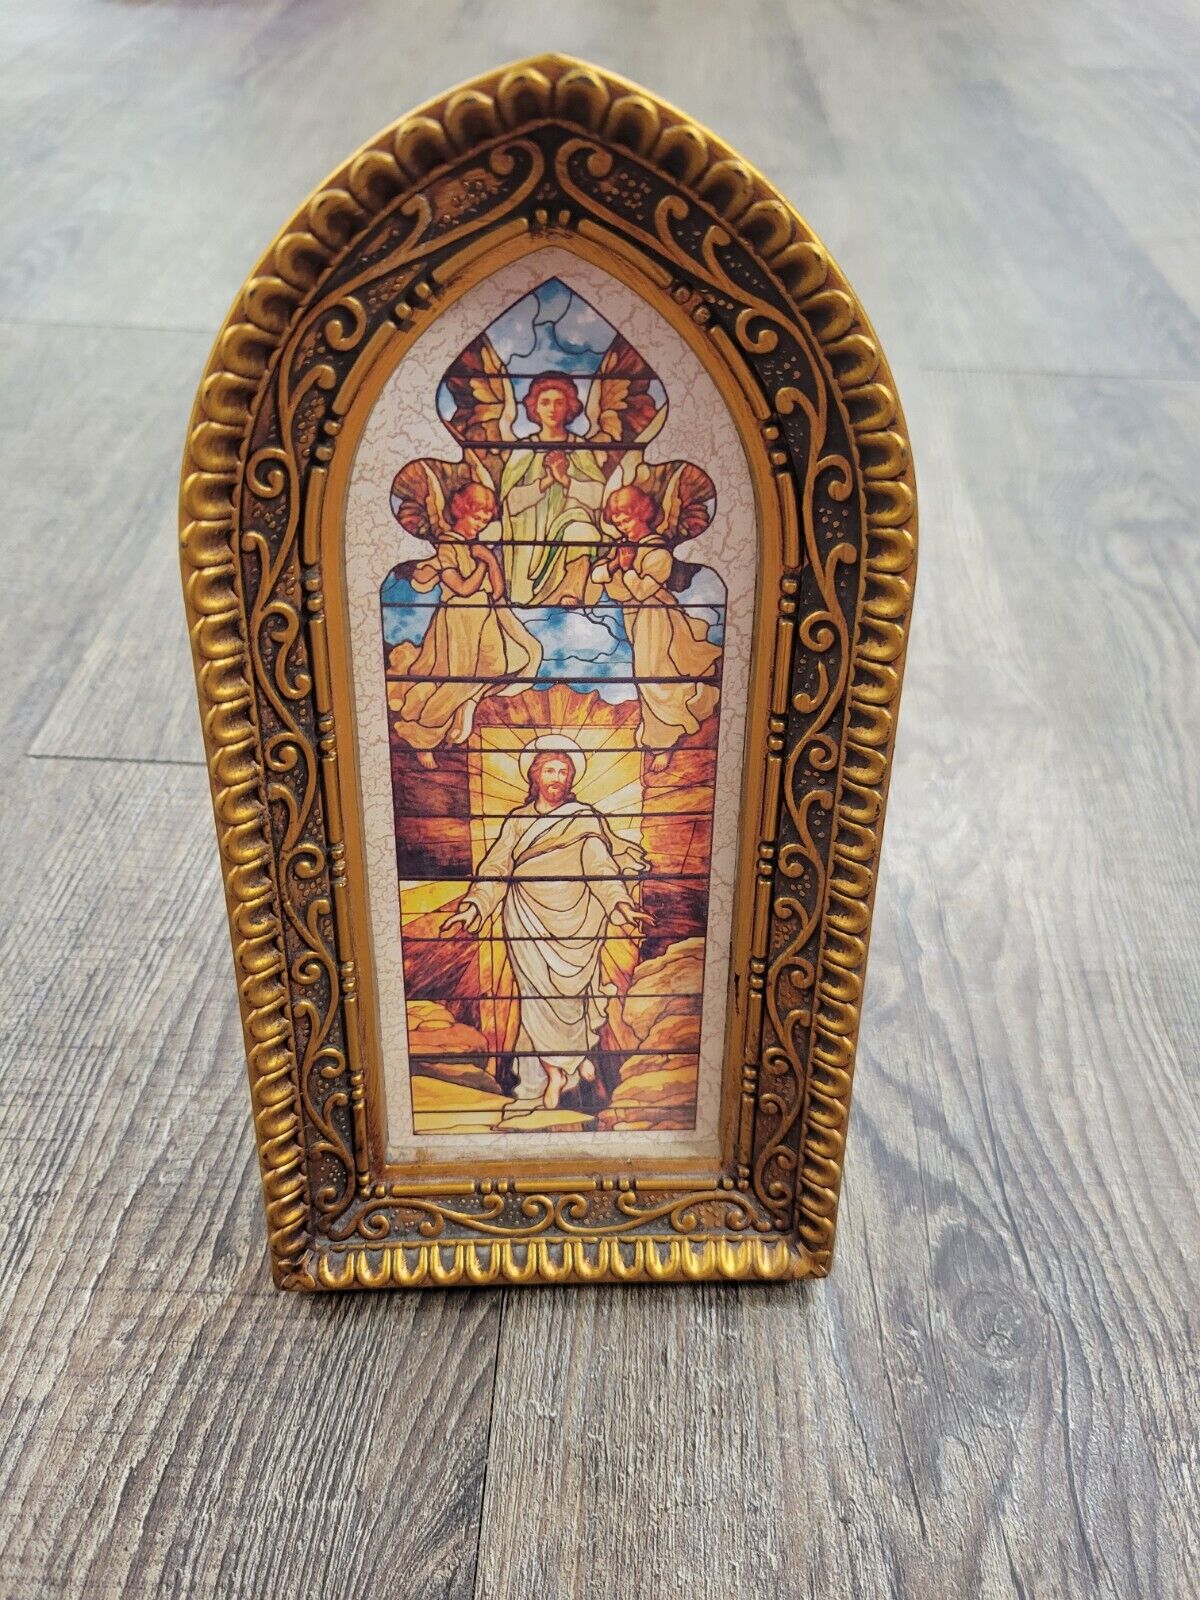 Vintage Framed Stained Glass Window Print Catholic Church Religious Art